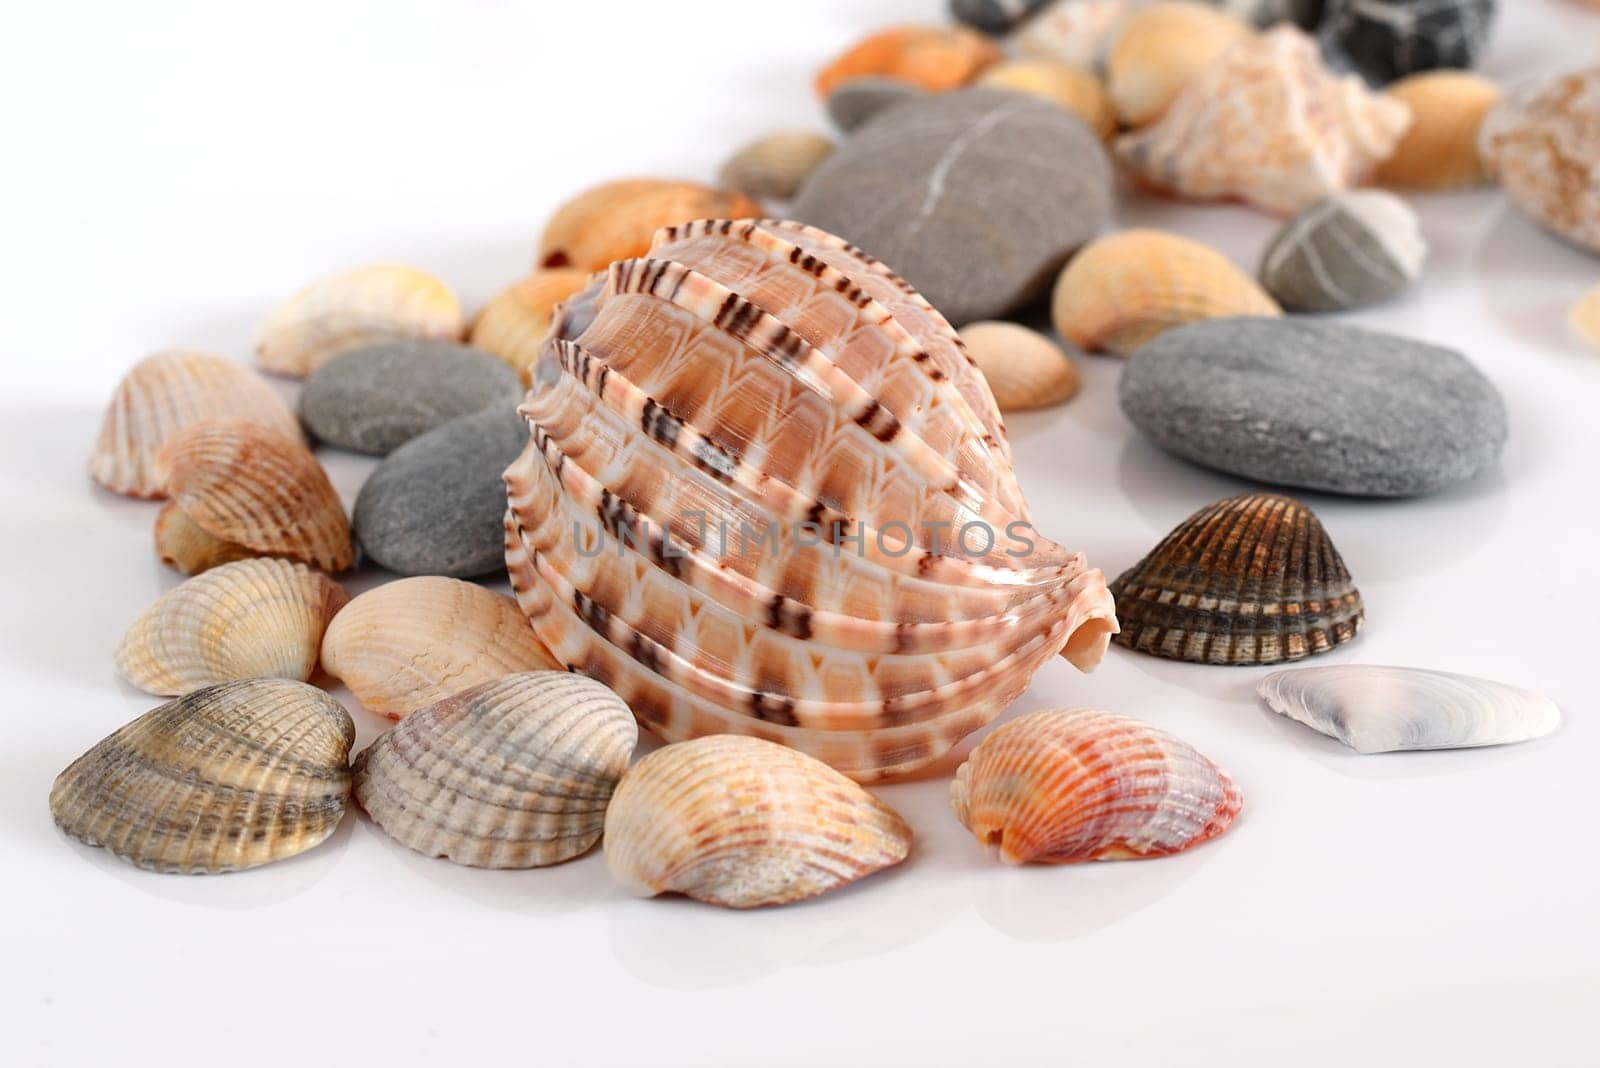 Various shells and pebbles on a light background by olgavolodina